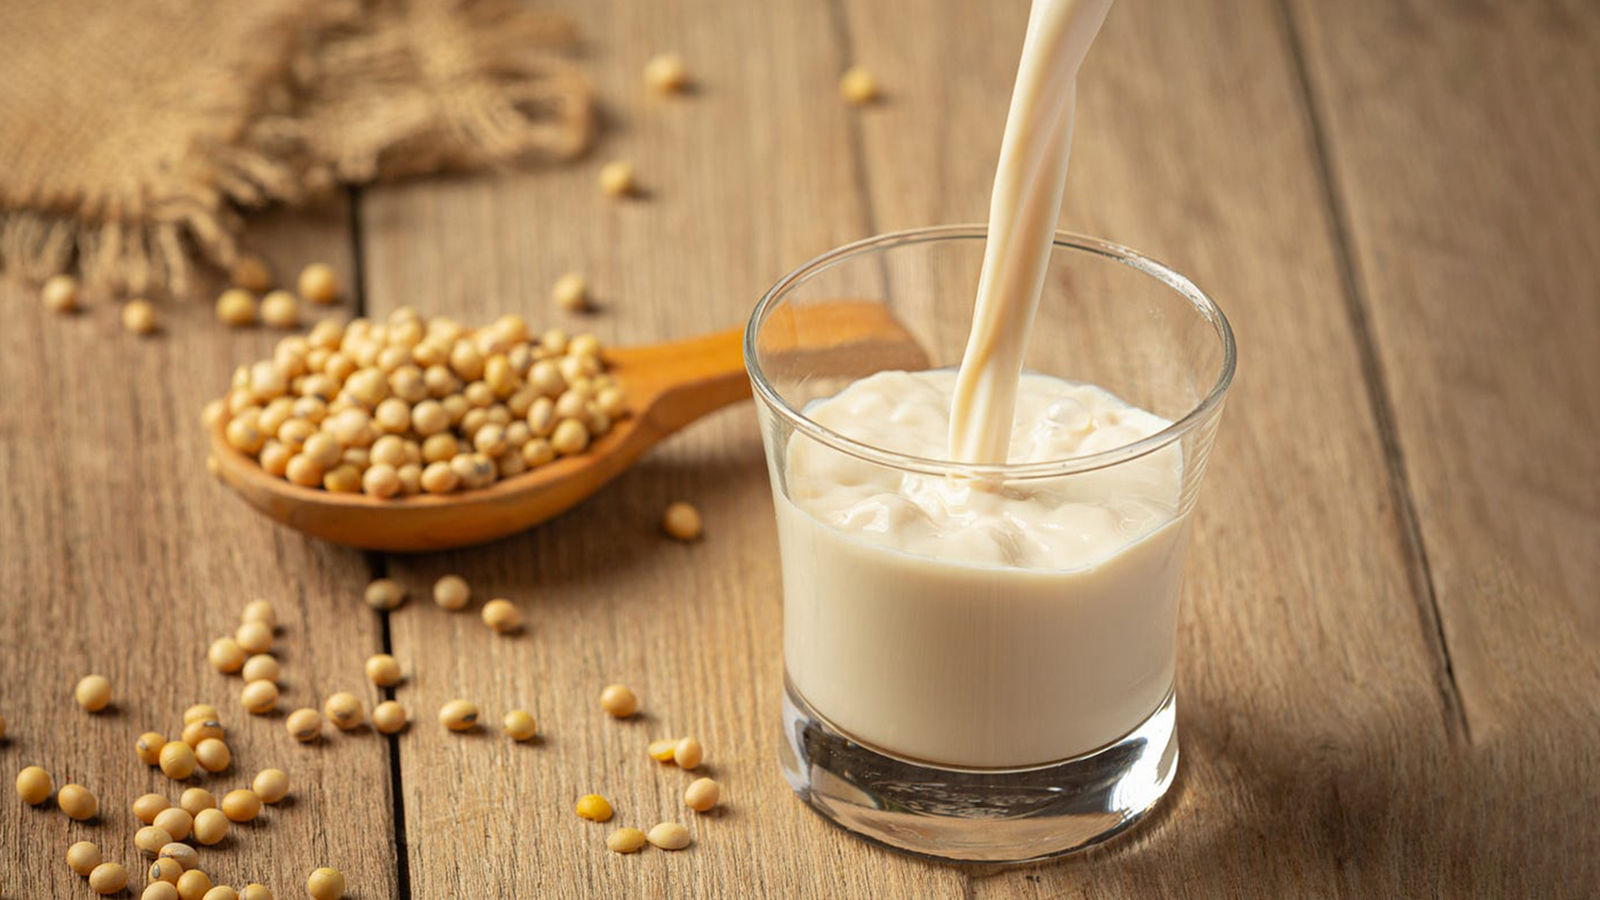 Benefits of soy milk for healthy